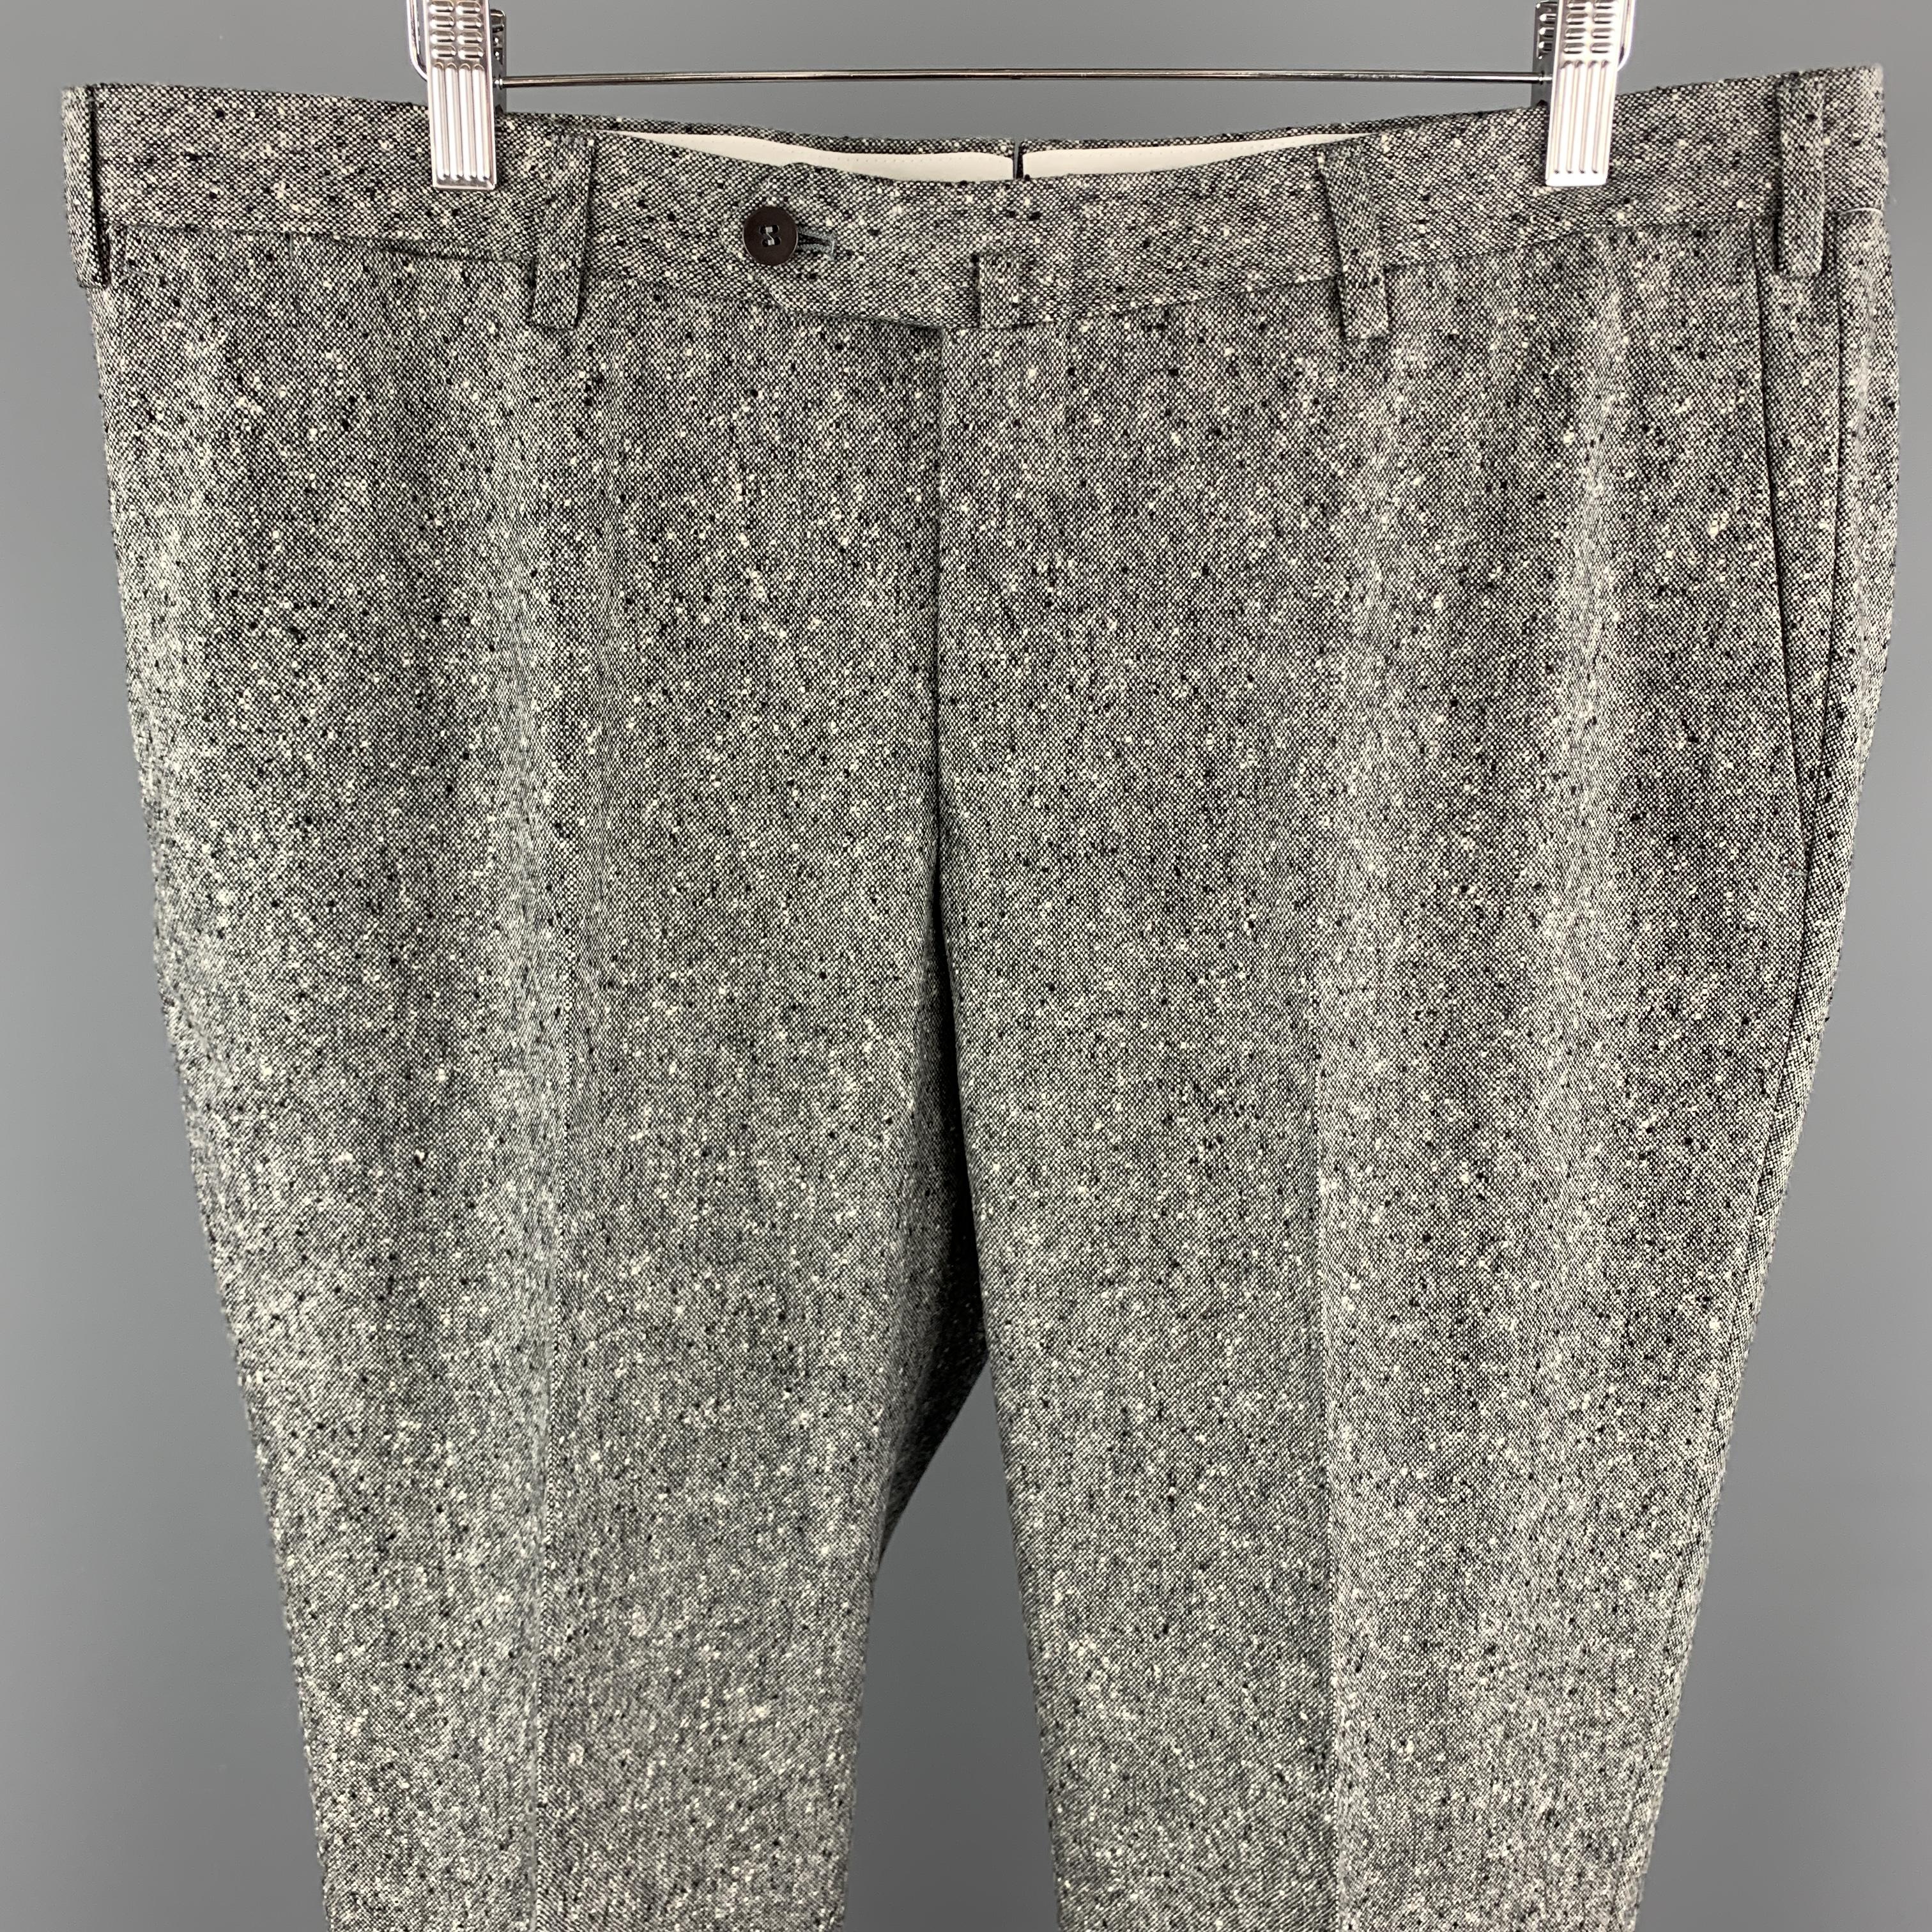 ISAIA dress pants come in gray speckled woven wool with a flat front leg and tab waistband. Made in Italy.

Excellent Pre-Owned Condition.
Marked: IT 54 R

Measurements:

Waist: 39 in.
Rise: 10 in.
Inseam: 33 in.